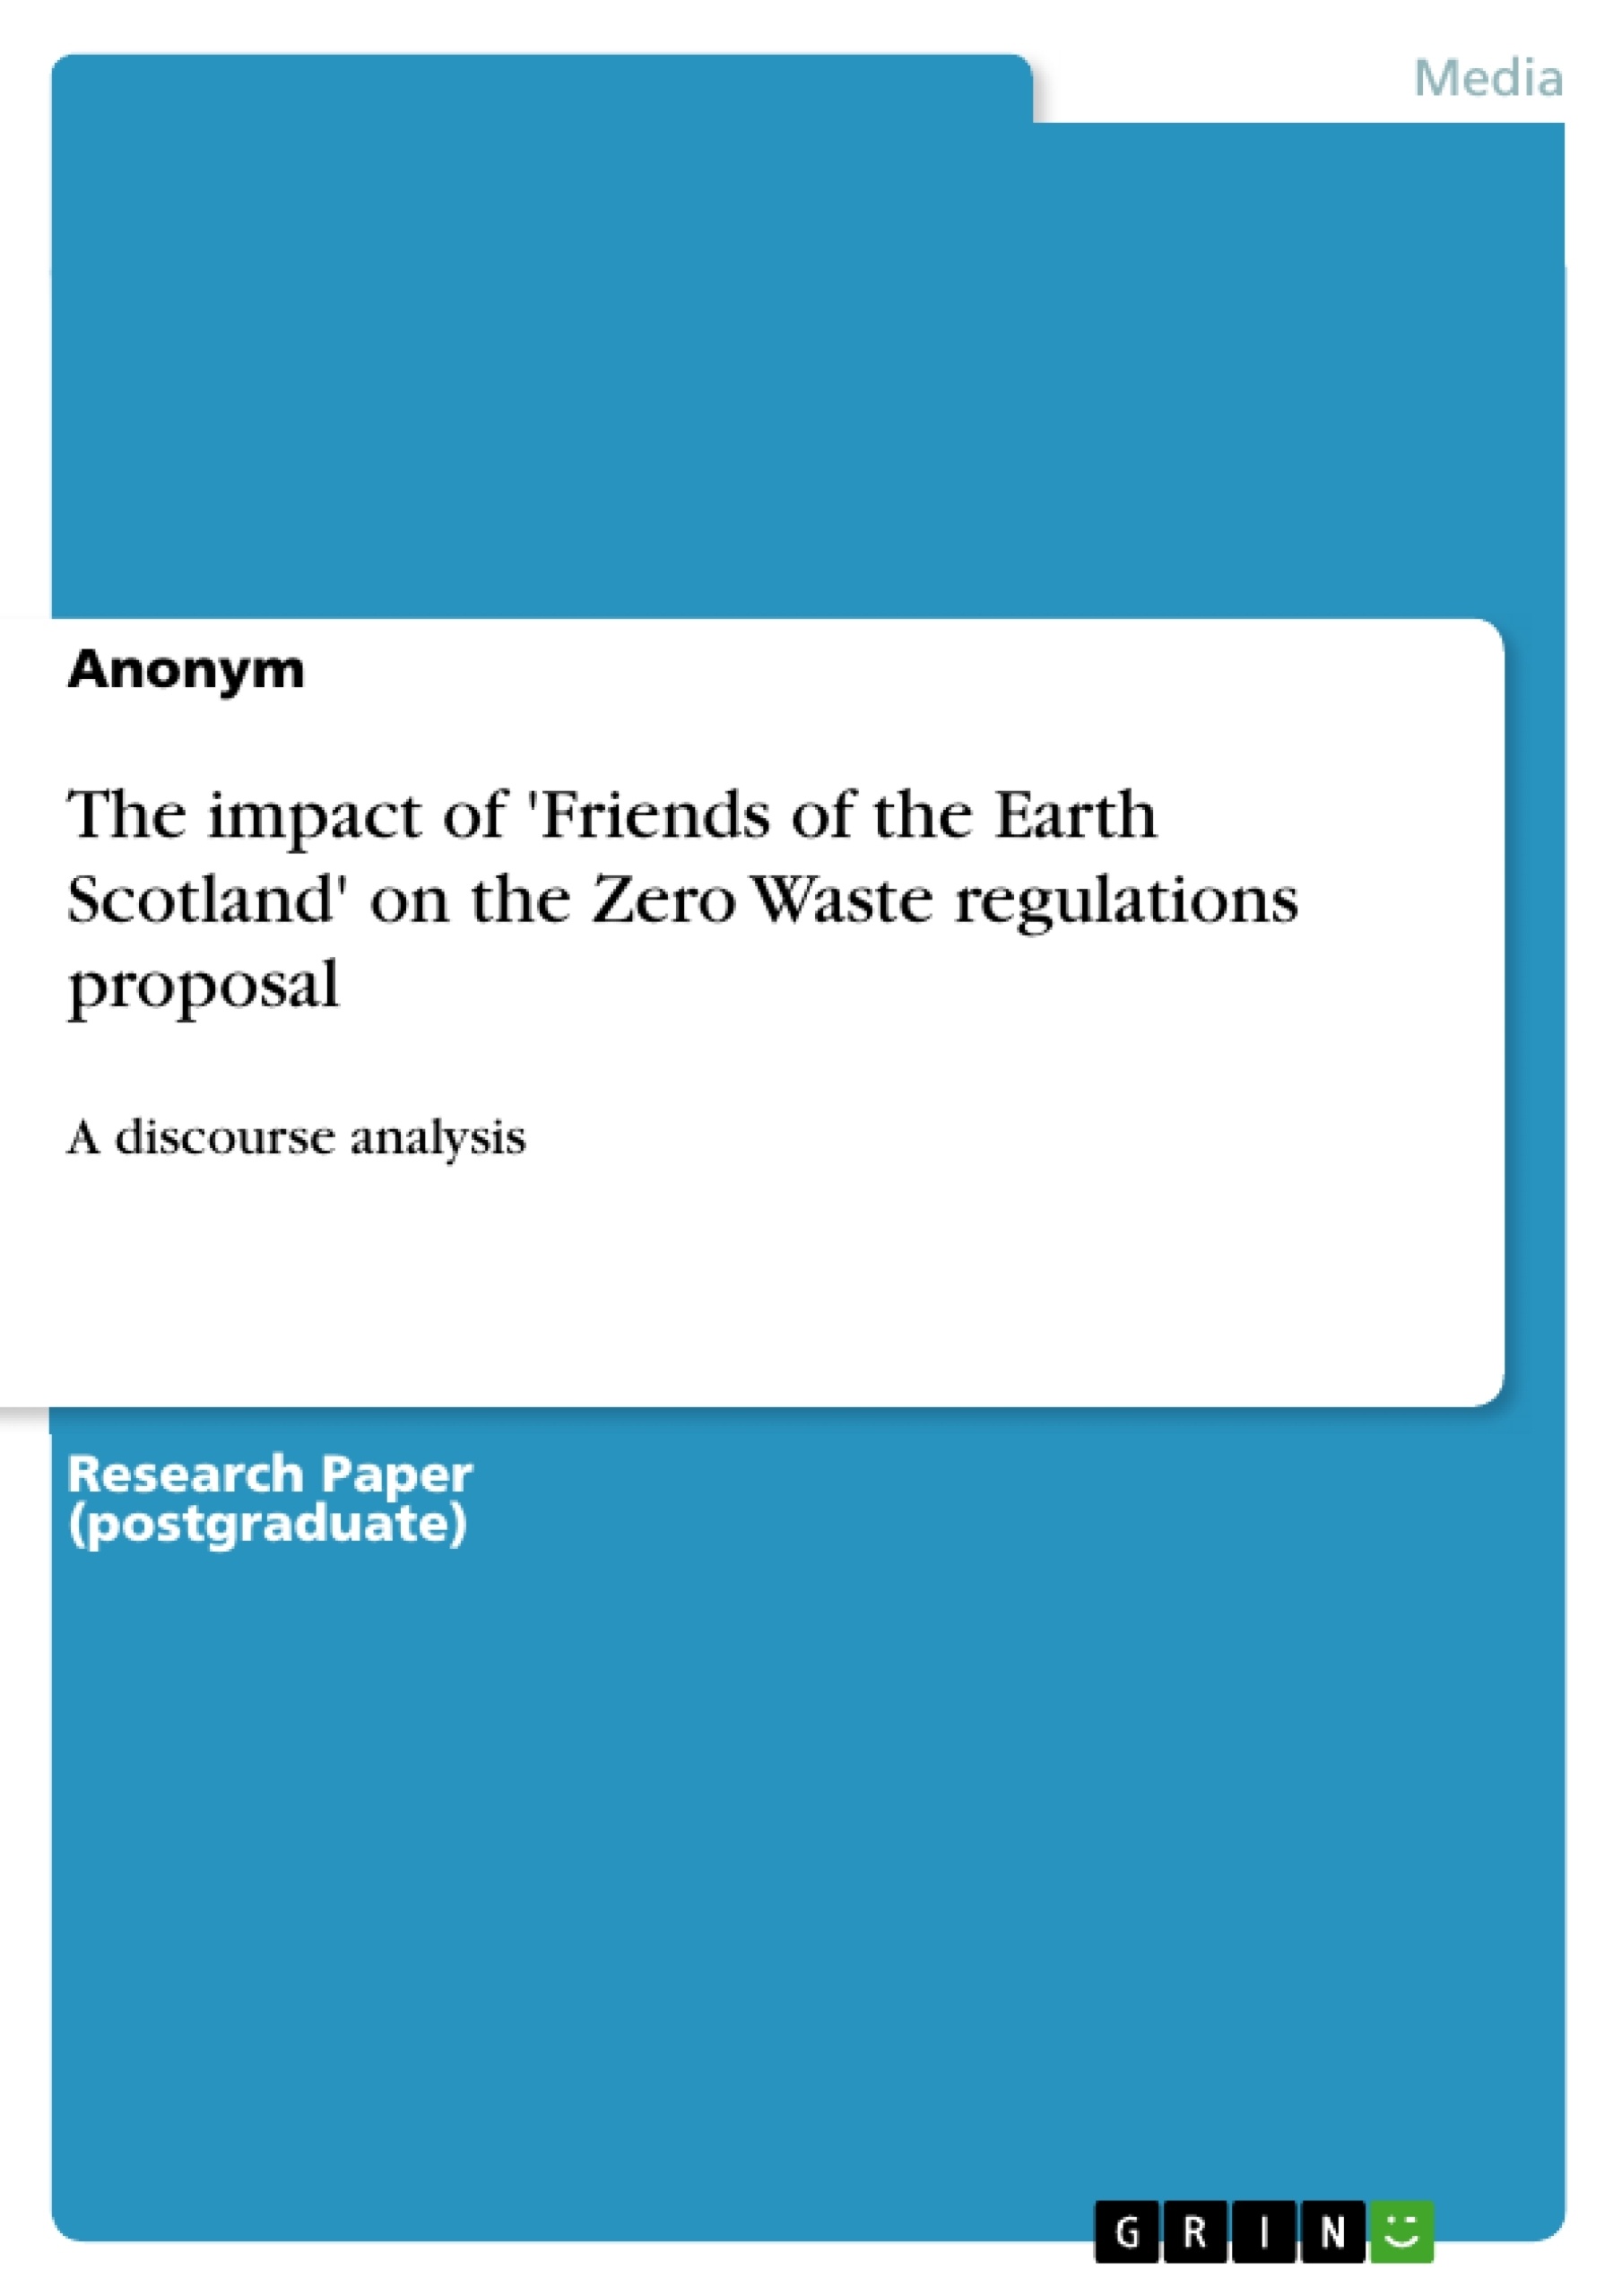 Title: The impact of 'Friends of the Earth Scotland' on the Zero Waste regulations proposal